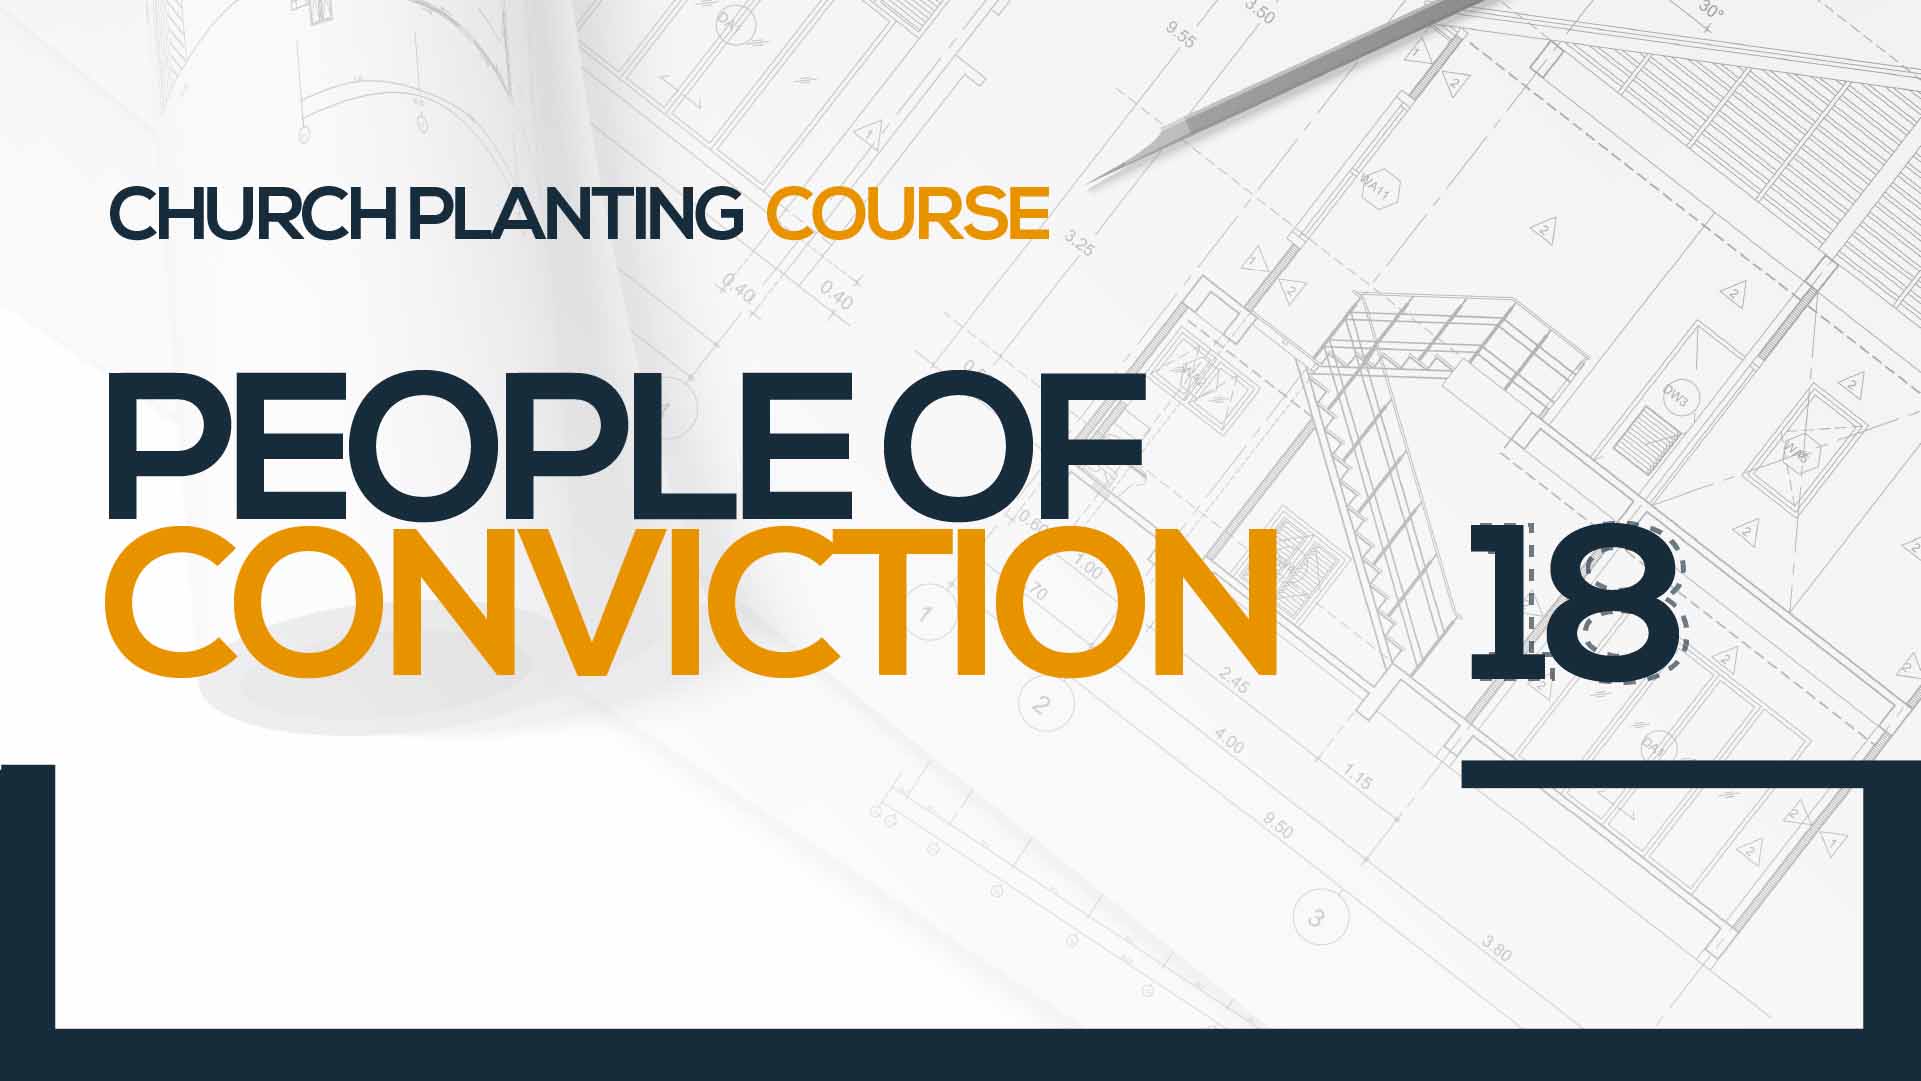 Video image for ‘PEOPLE OF CONVICTION’